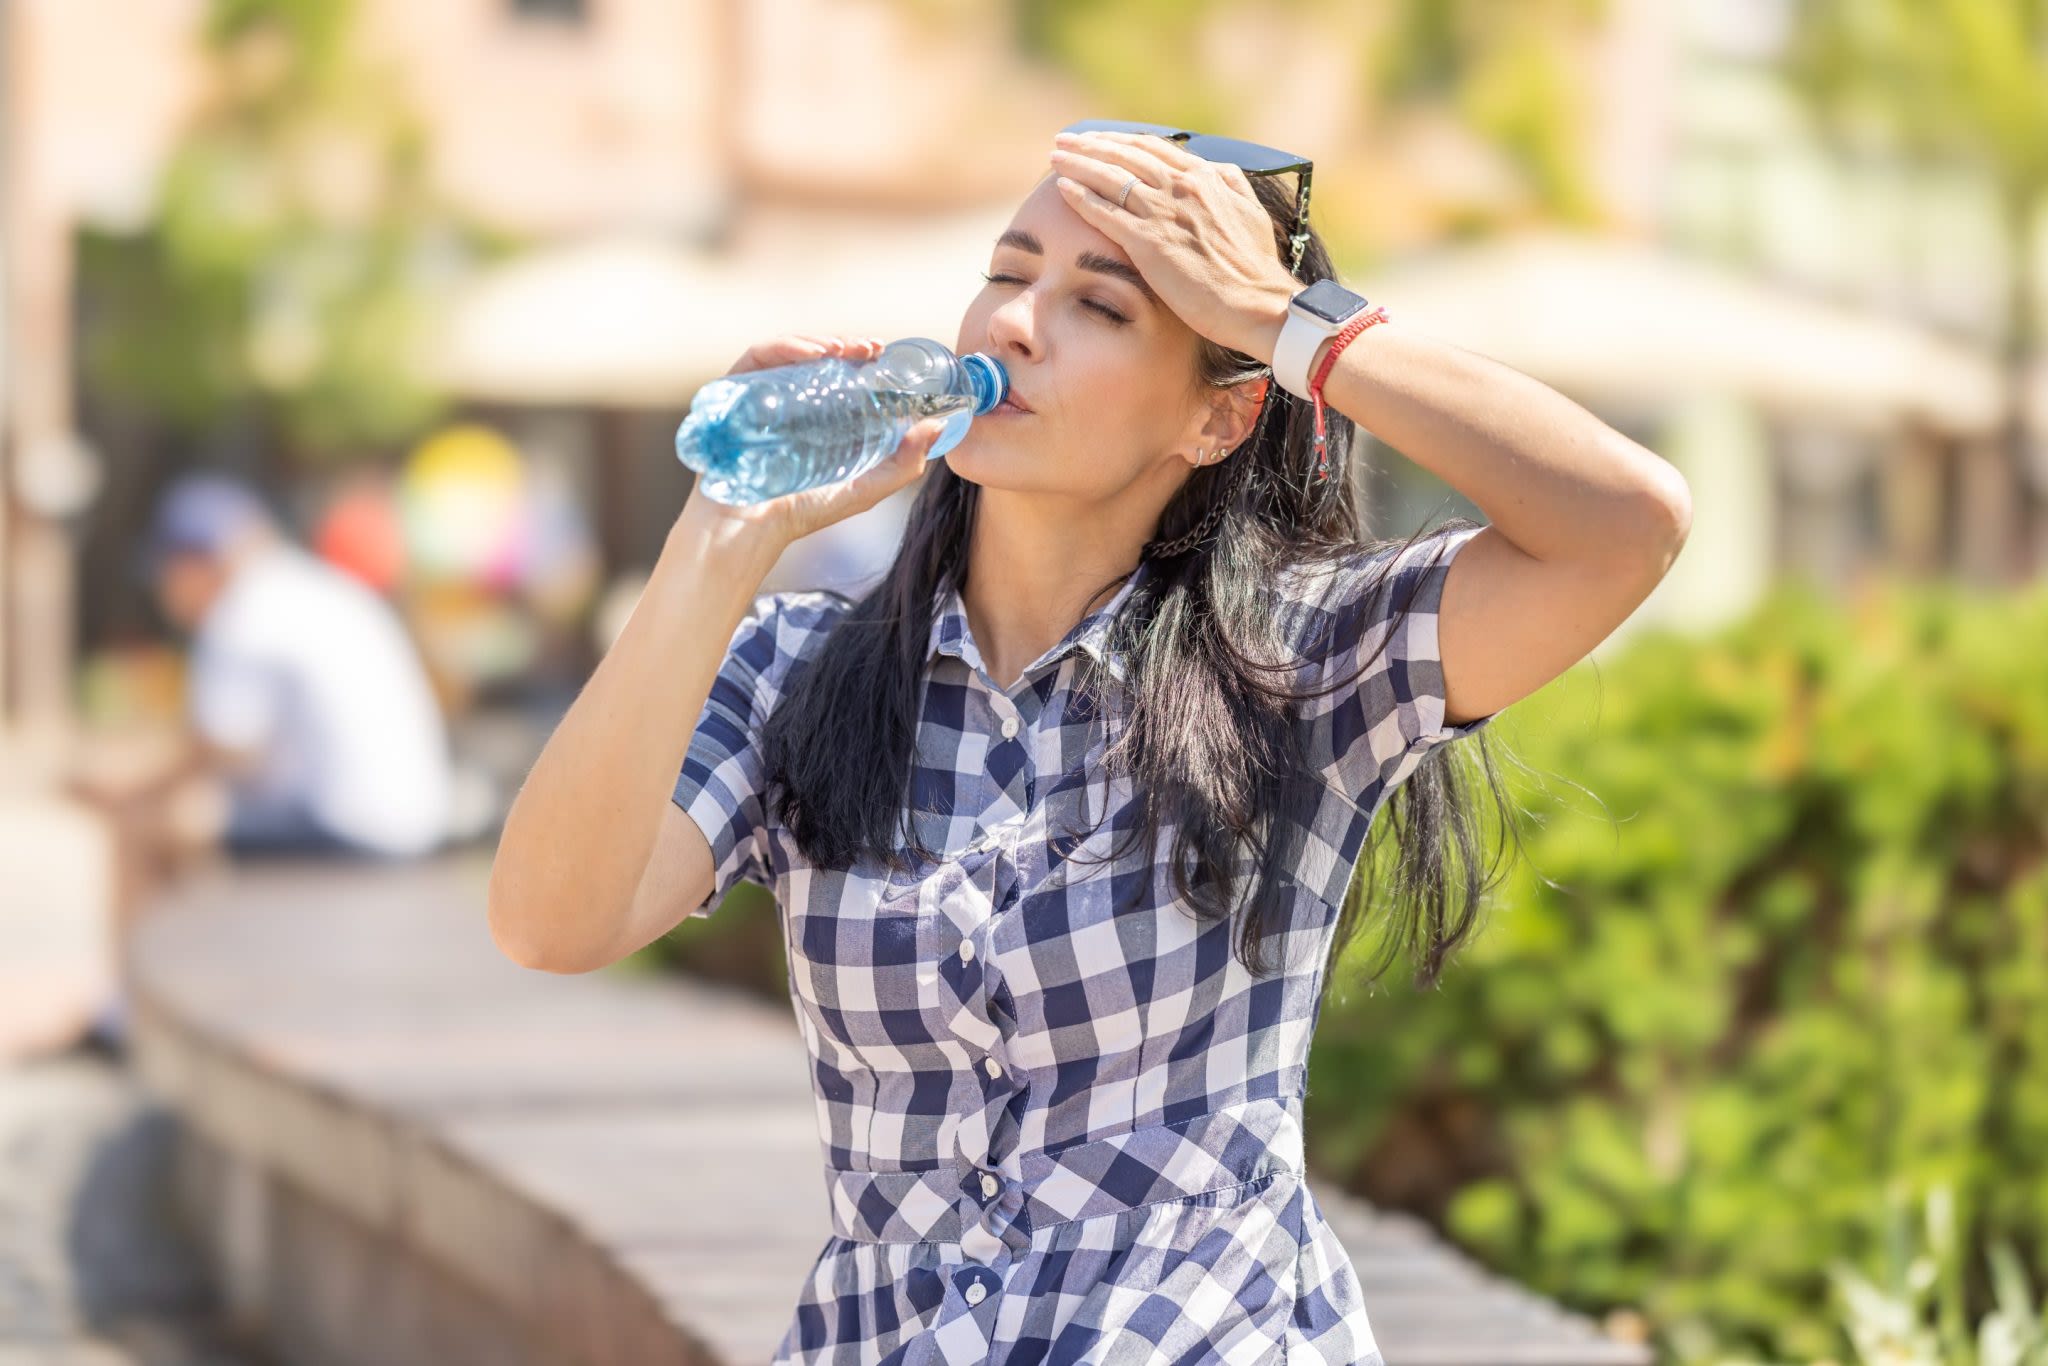 5 simple tips to stay hydrated this summer